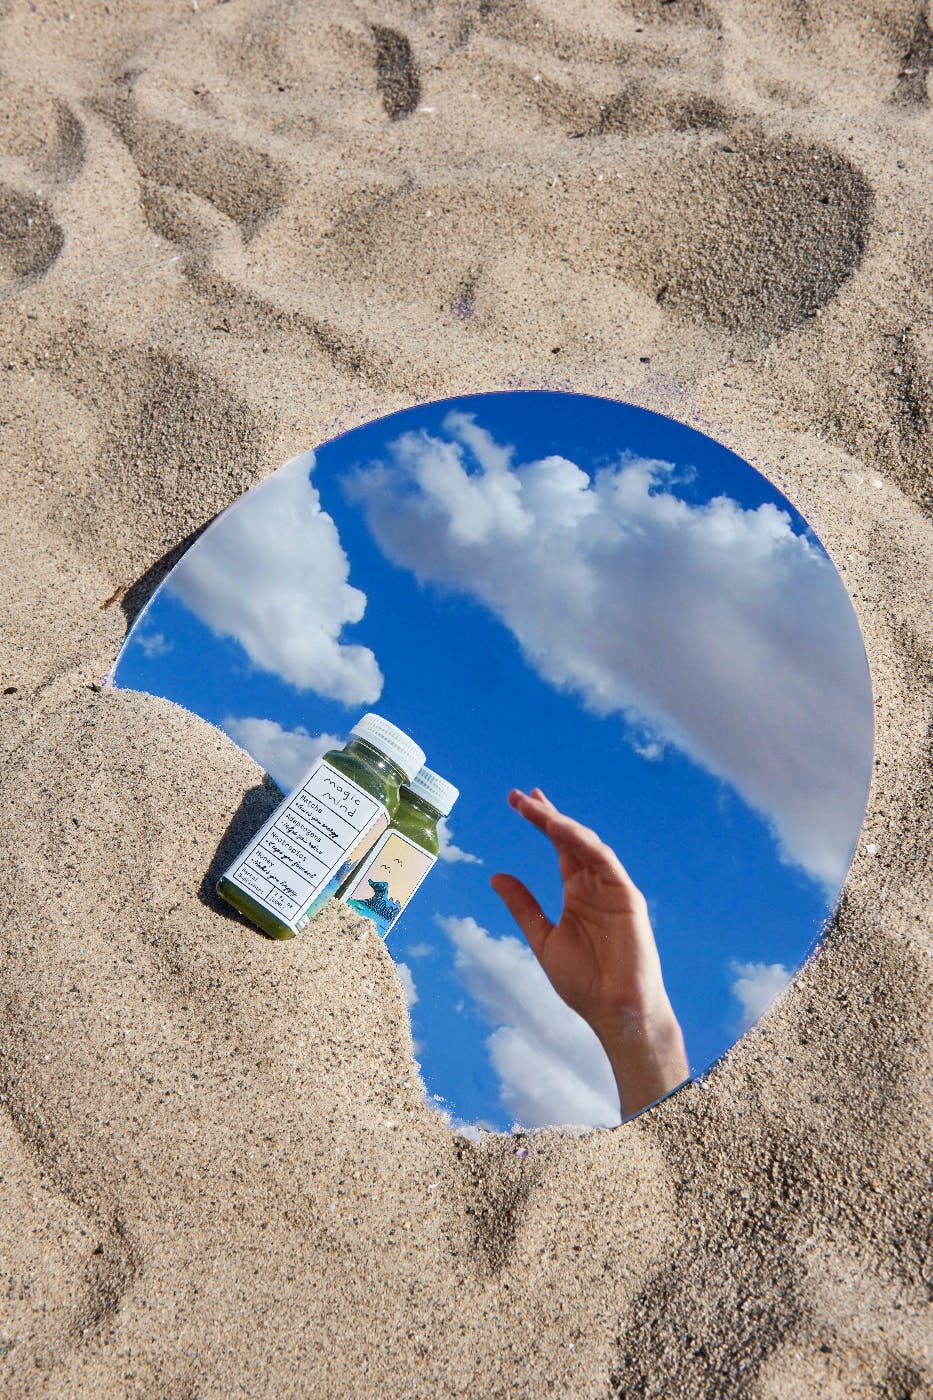 a round mirror in the sand with a small vile and clouds and a hand reflected